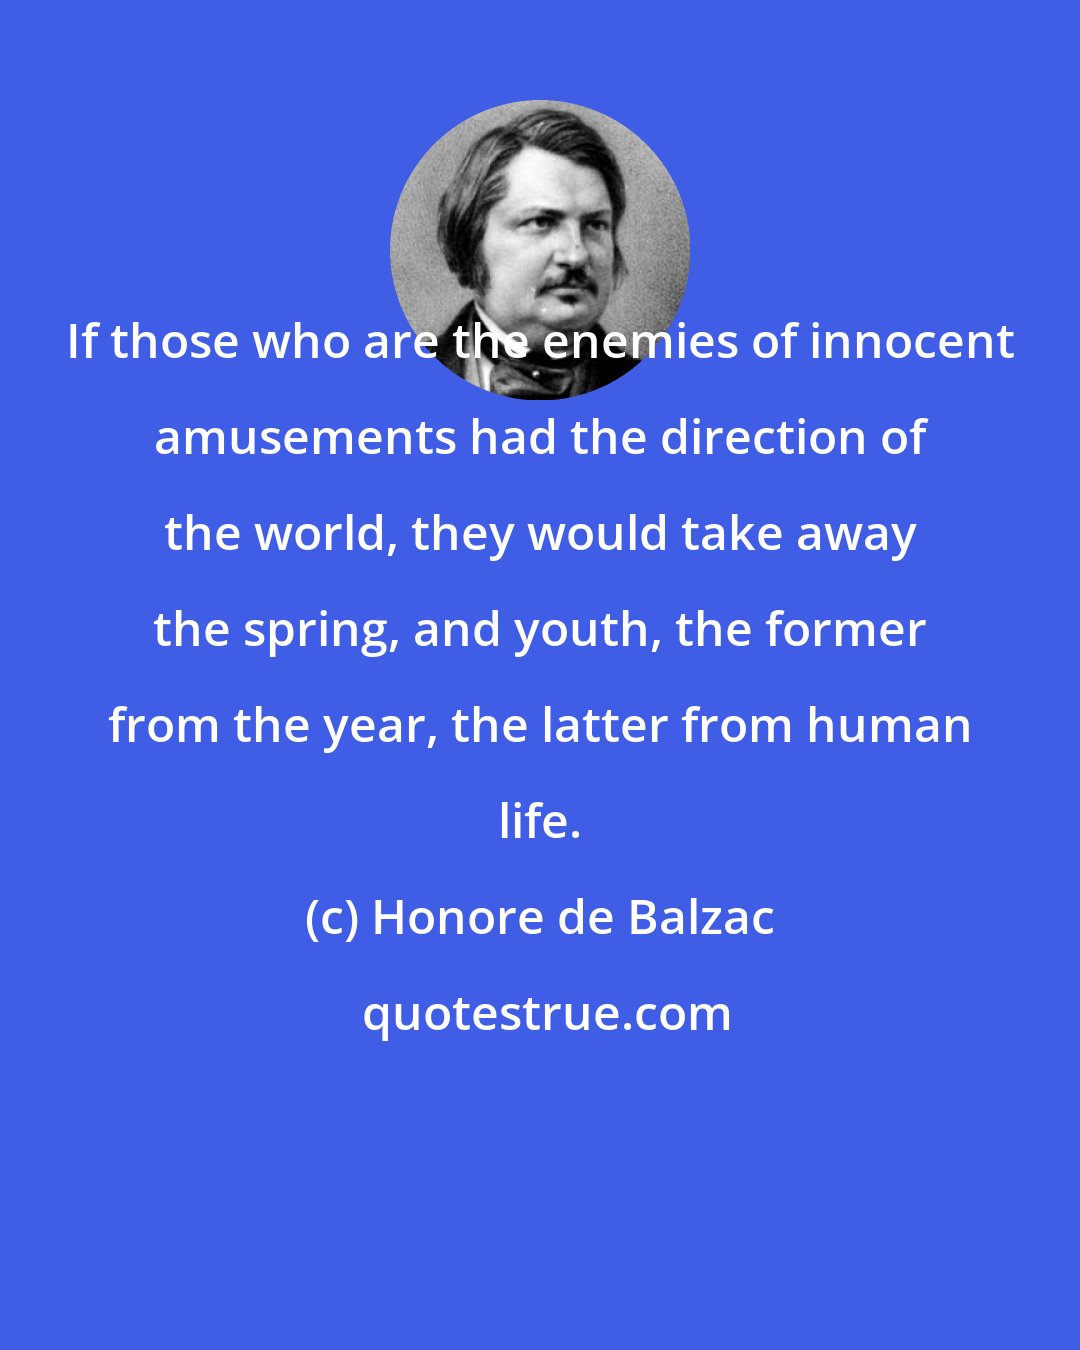 Honore de Balzac: If those who are the enemies of innocent amusements had the direction of the world, they would take away the spring, and youth, the former from the year, the latter from human life.